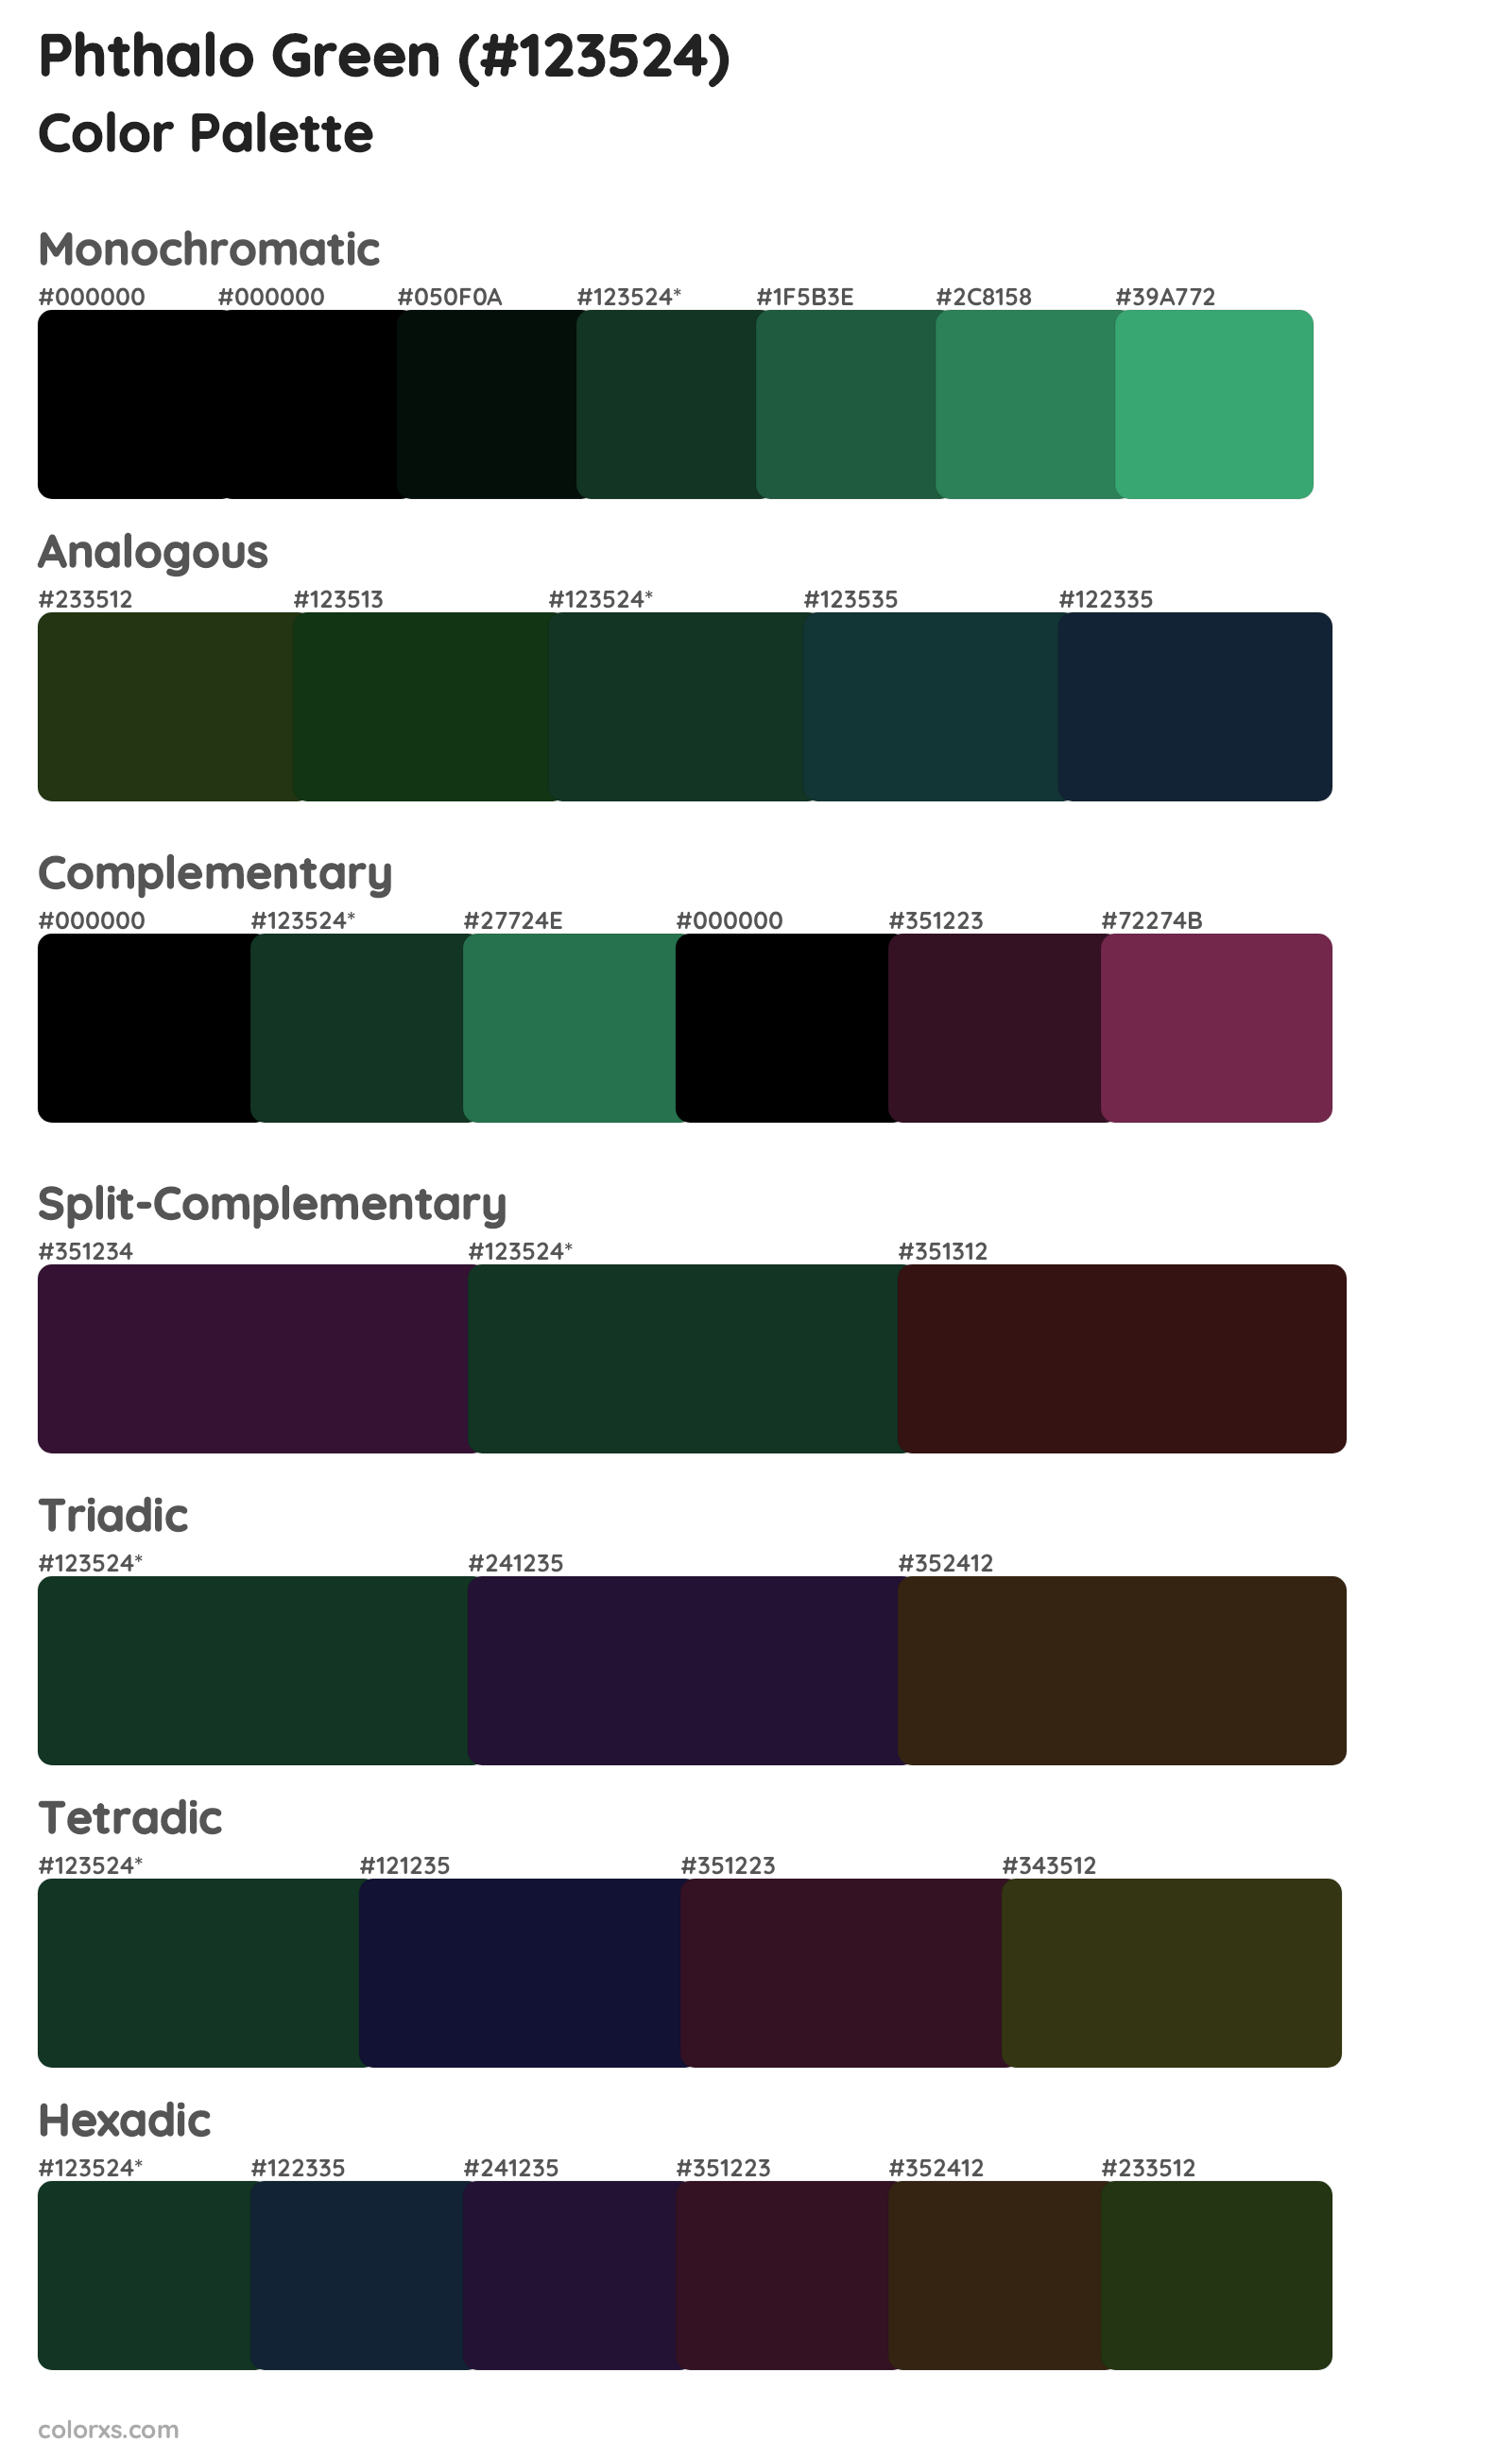 Phthalo Green Color Scheme Palettes